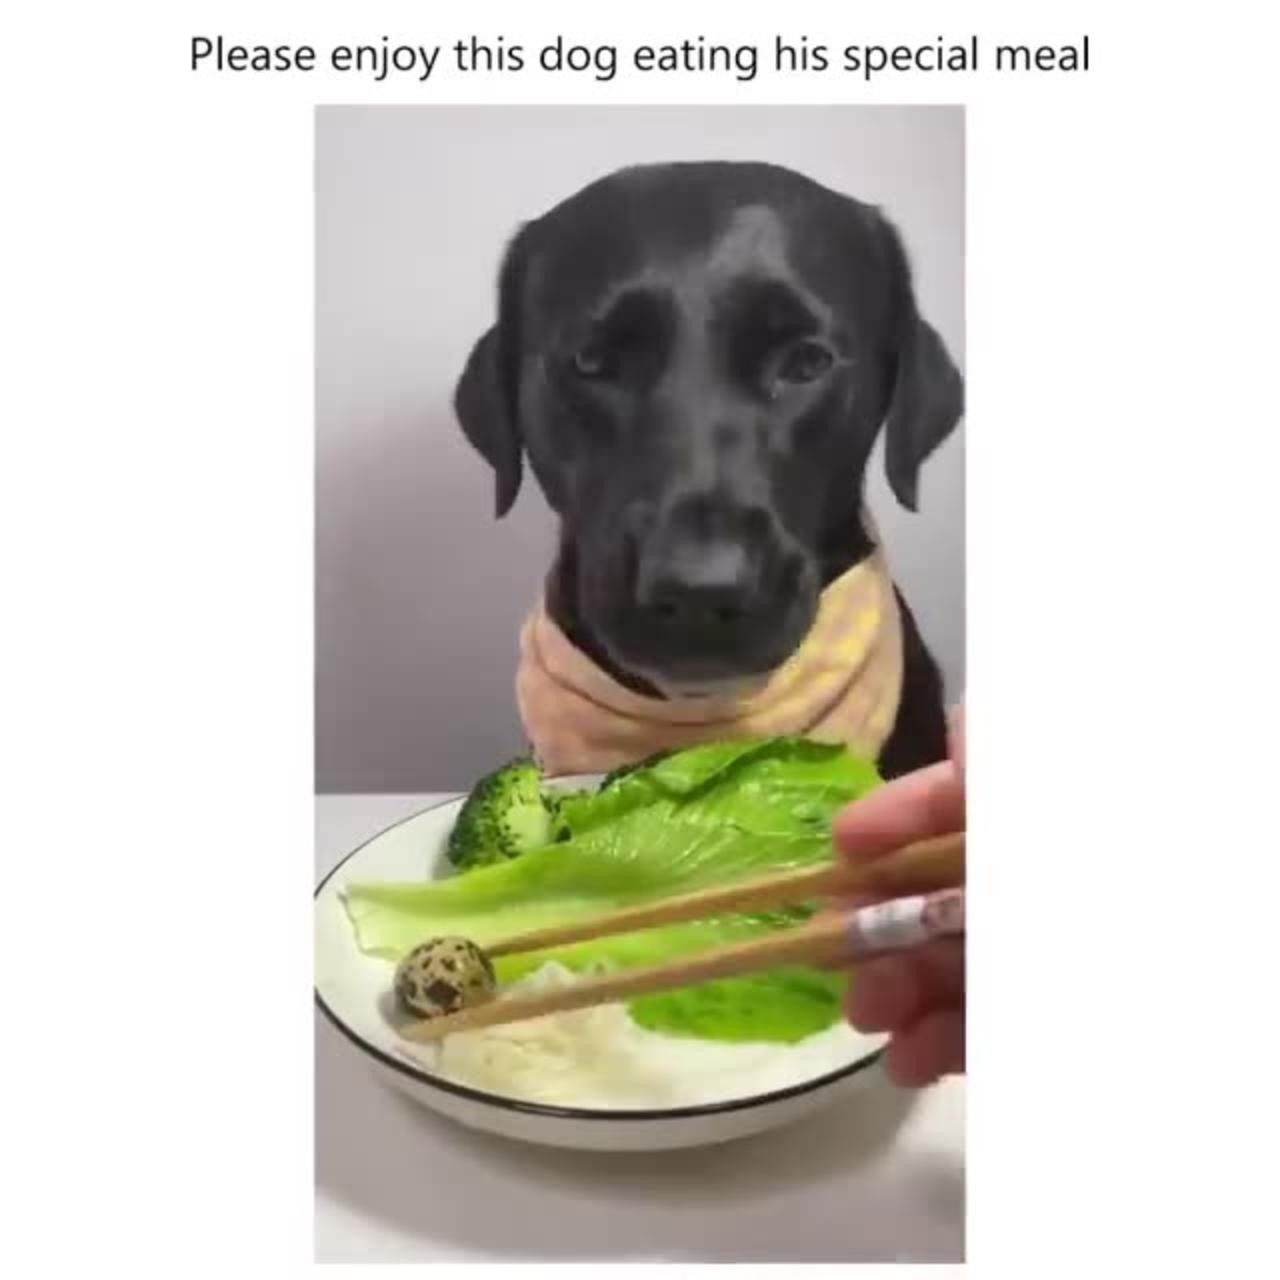 What Makes This Dog's Meal So Special?